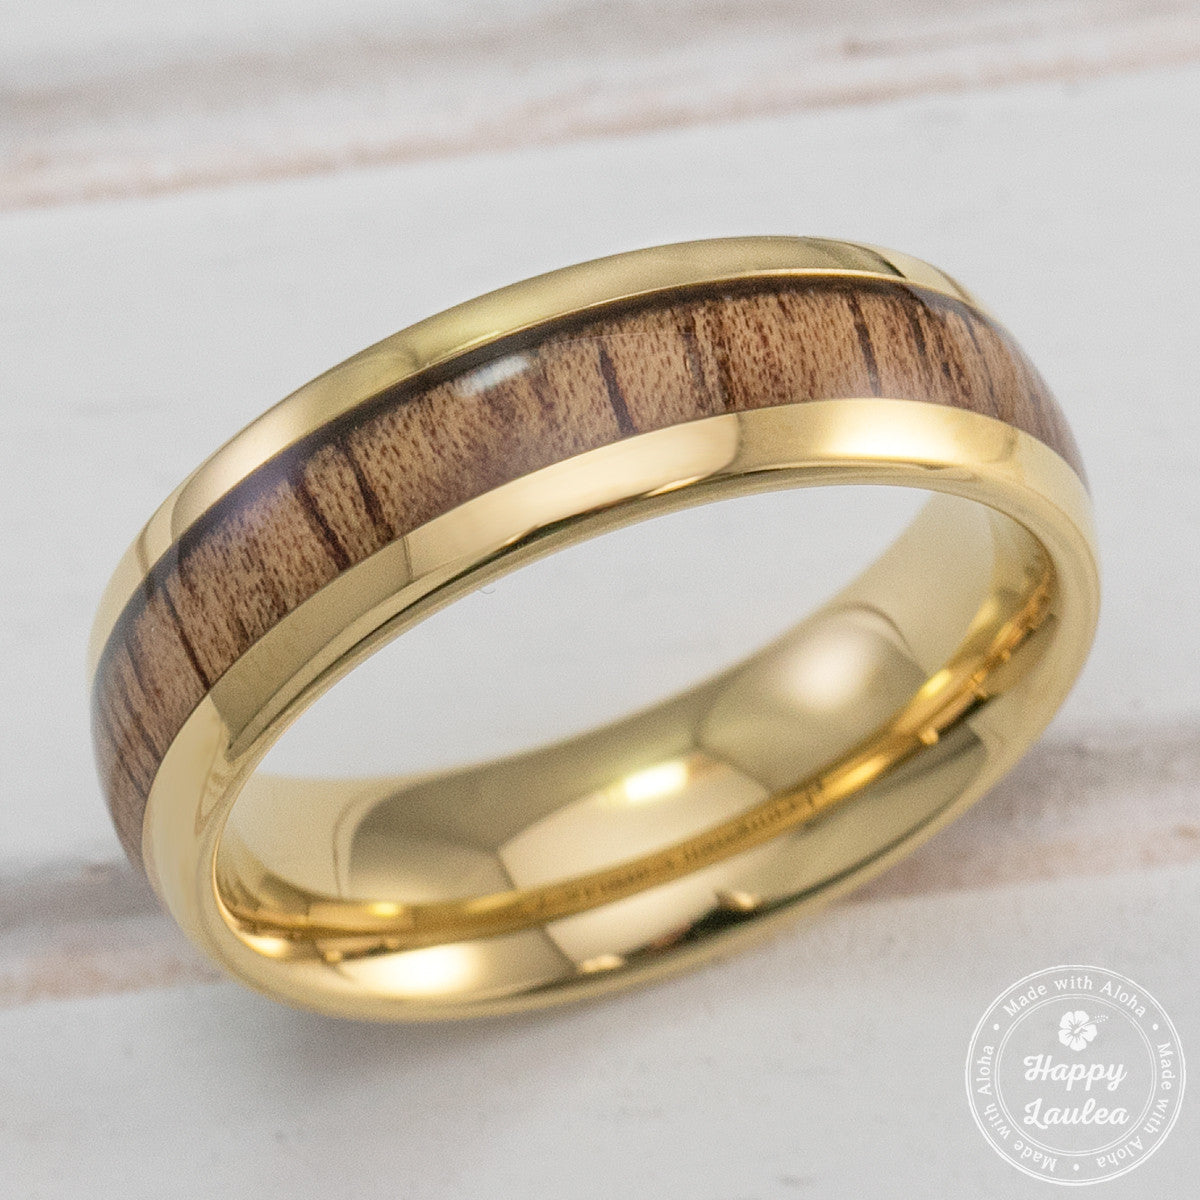 Tungsten Carbide Gold Plated Ring with Koa Wood Inlay - 6mm, Dome Shape, Comfort Fitment